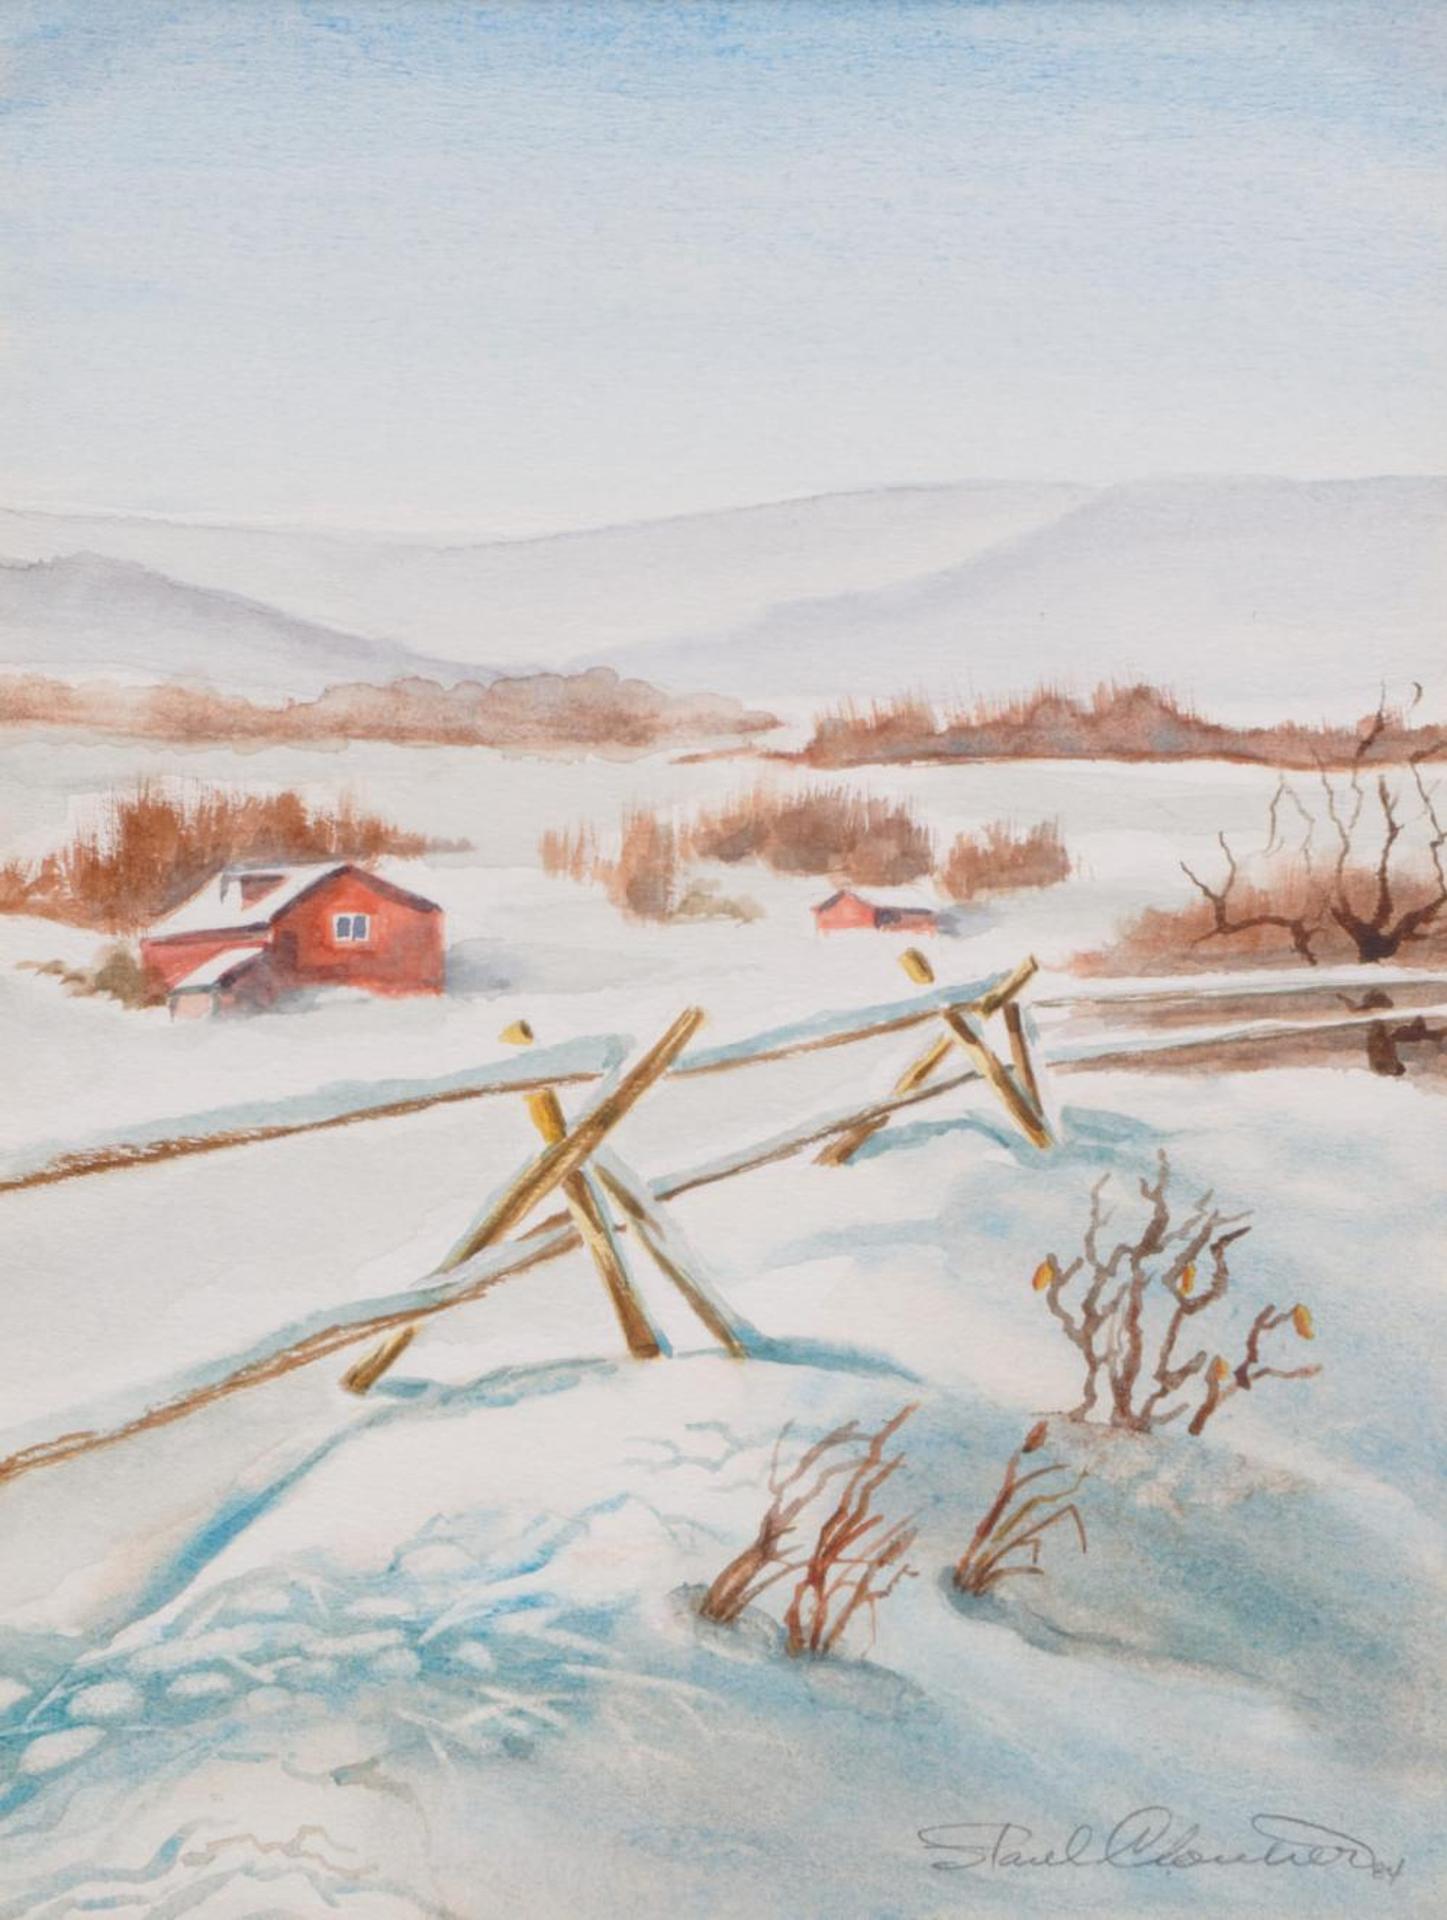 Paul Cloutier (1919-2013) - Untitled - Fence in the Snow